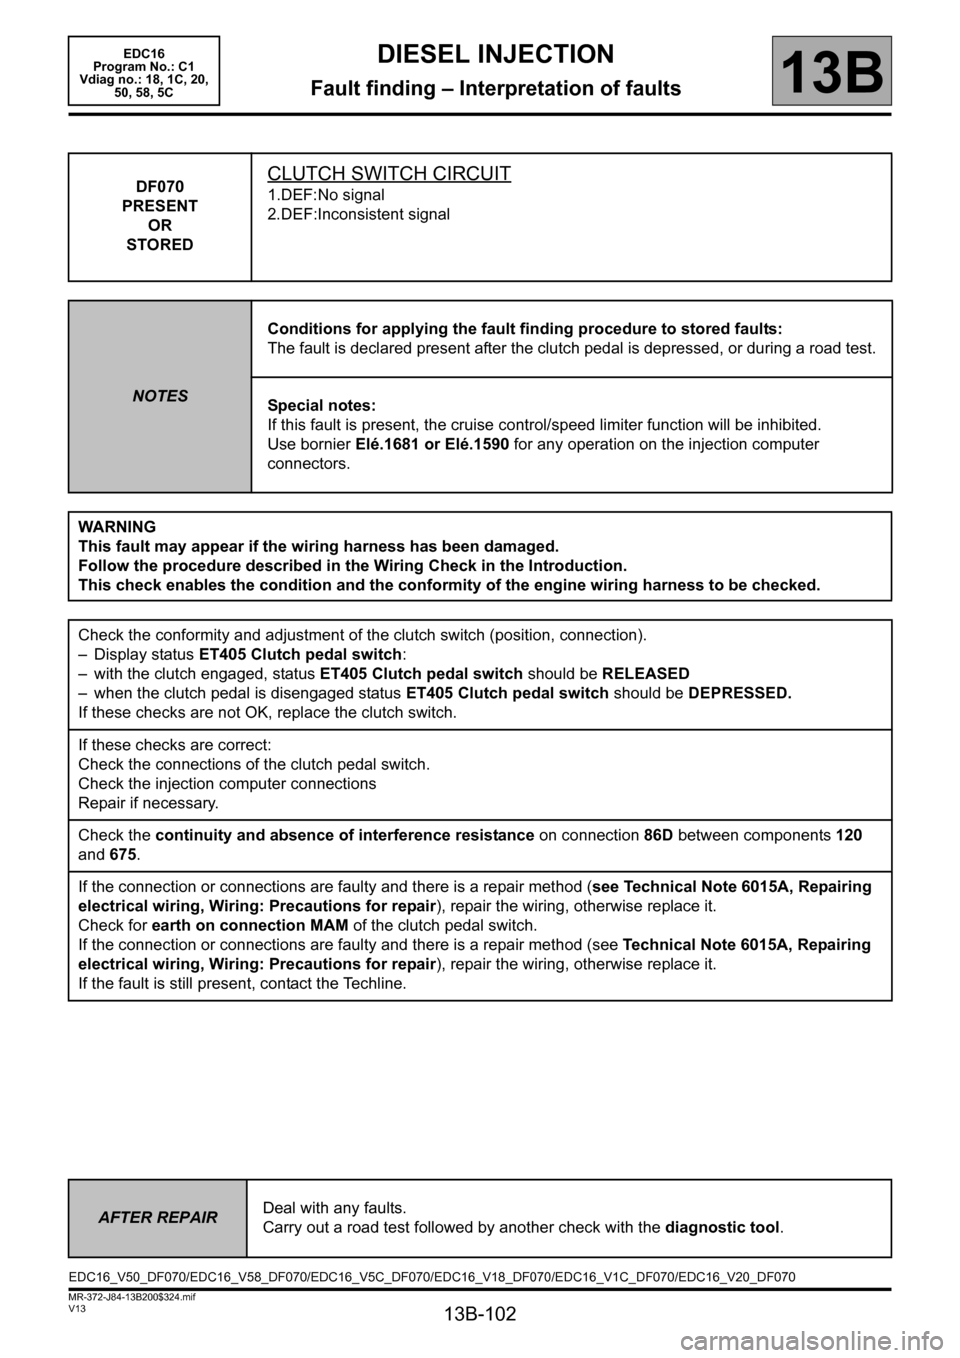 RENAULT SCENIC 2011 J95 / 3.G Engine And Peripherals EDC16 Service Manual 13B-102
MR-372-J84-13B200$324.mif
V13
DIESEL INJECTION
Fault finding – Interpretation of faults
EDC16  
Program No.: C1 
Vdiag no.: 18, 1C, 20,  
50, 58, 5C
13B
DF070
PRESENT
OR
STOREDCLUTCH SWITCH 